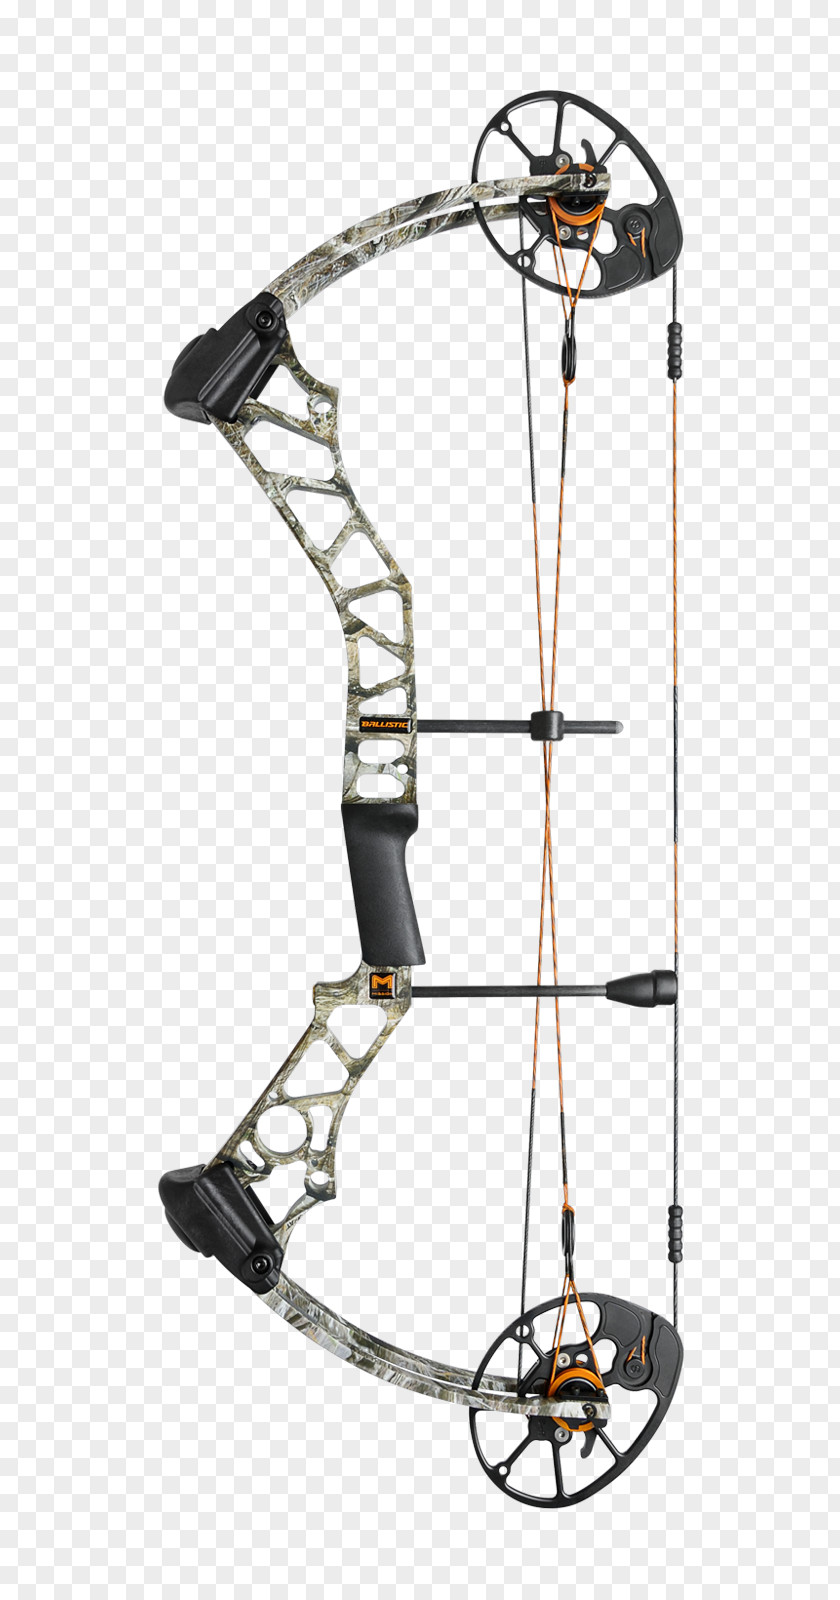 Archery Cover Bow And Arrow Hunting Ballistics Compound Bows PNG